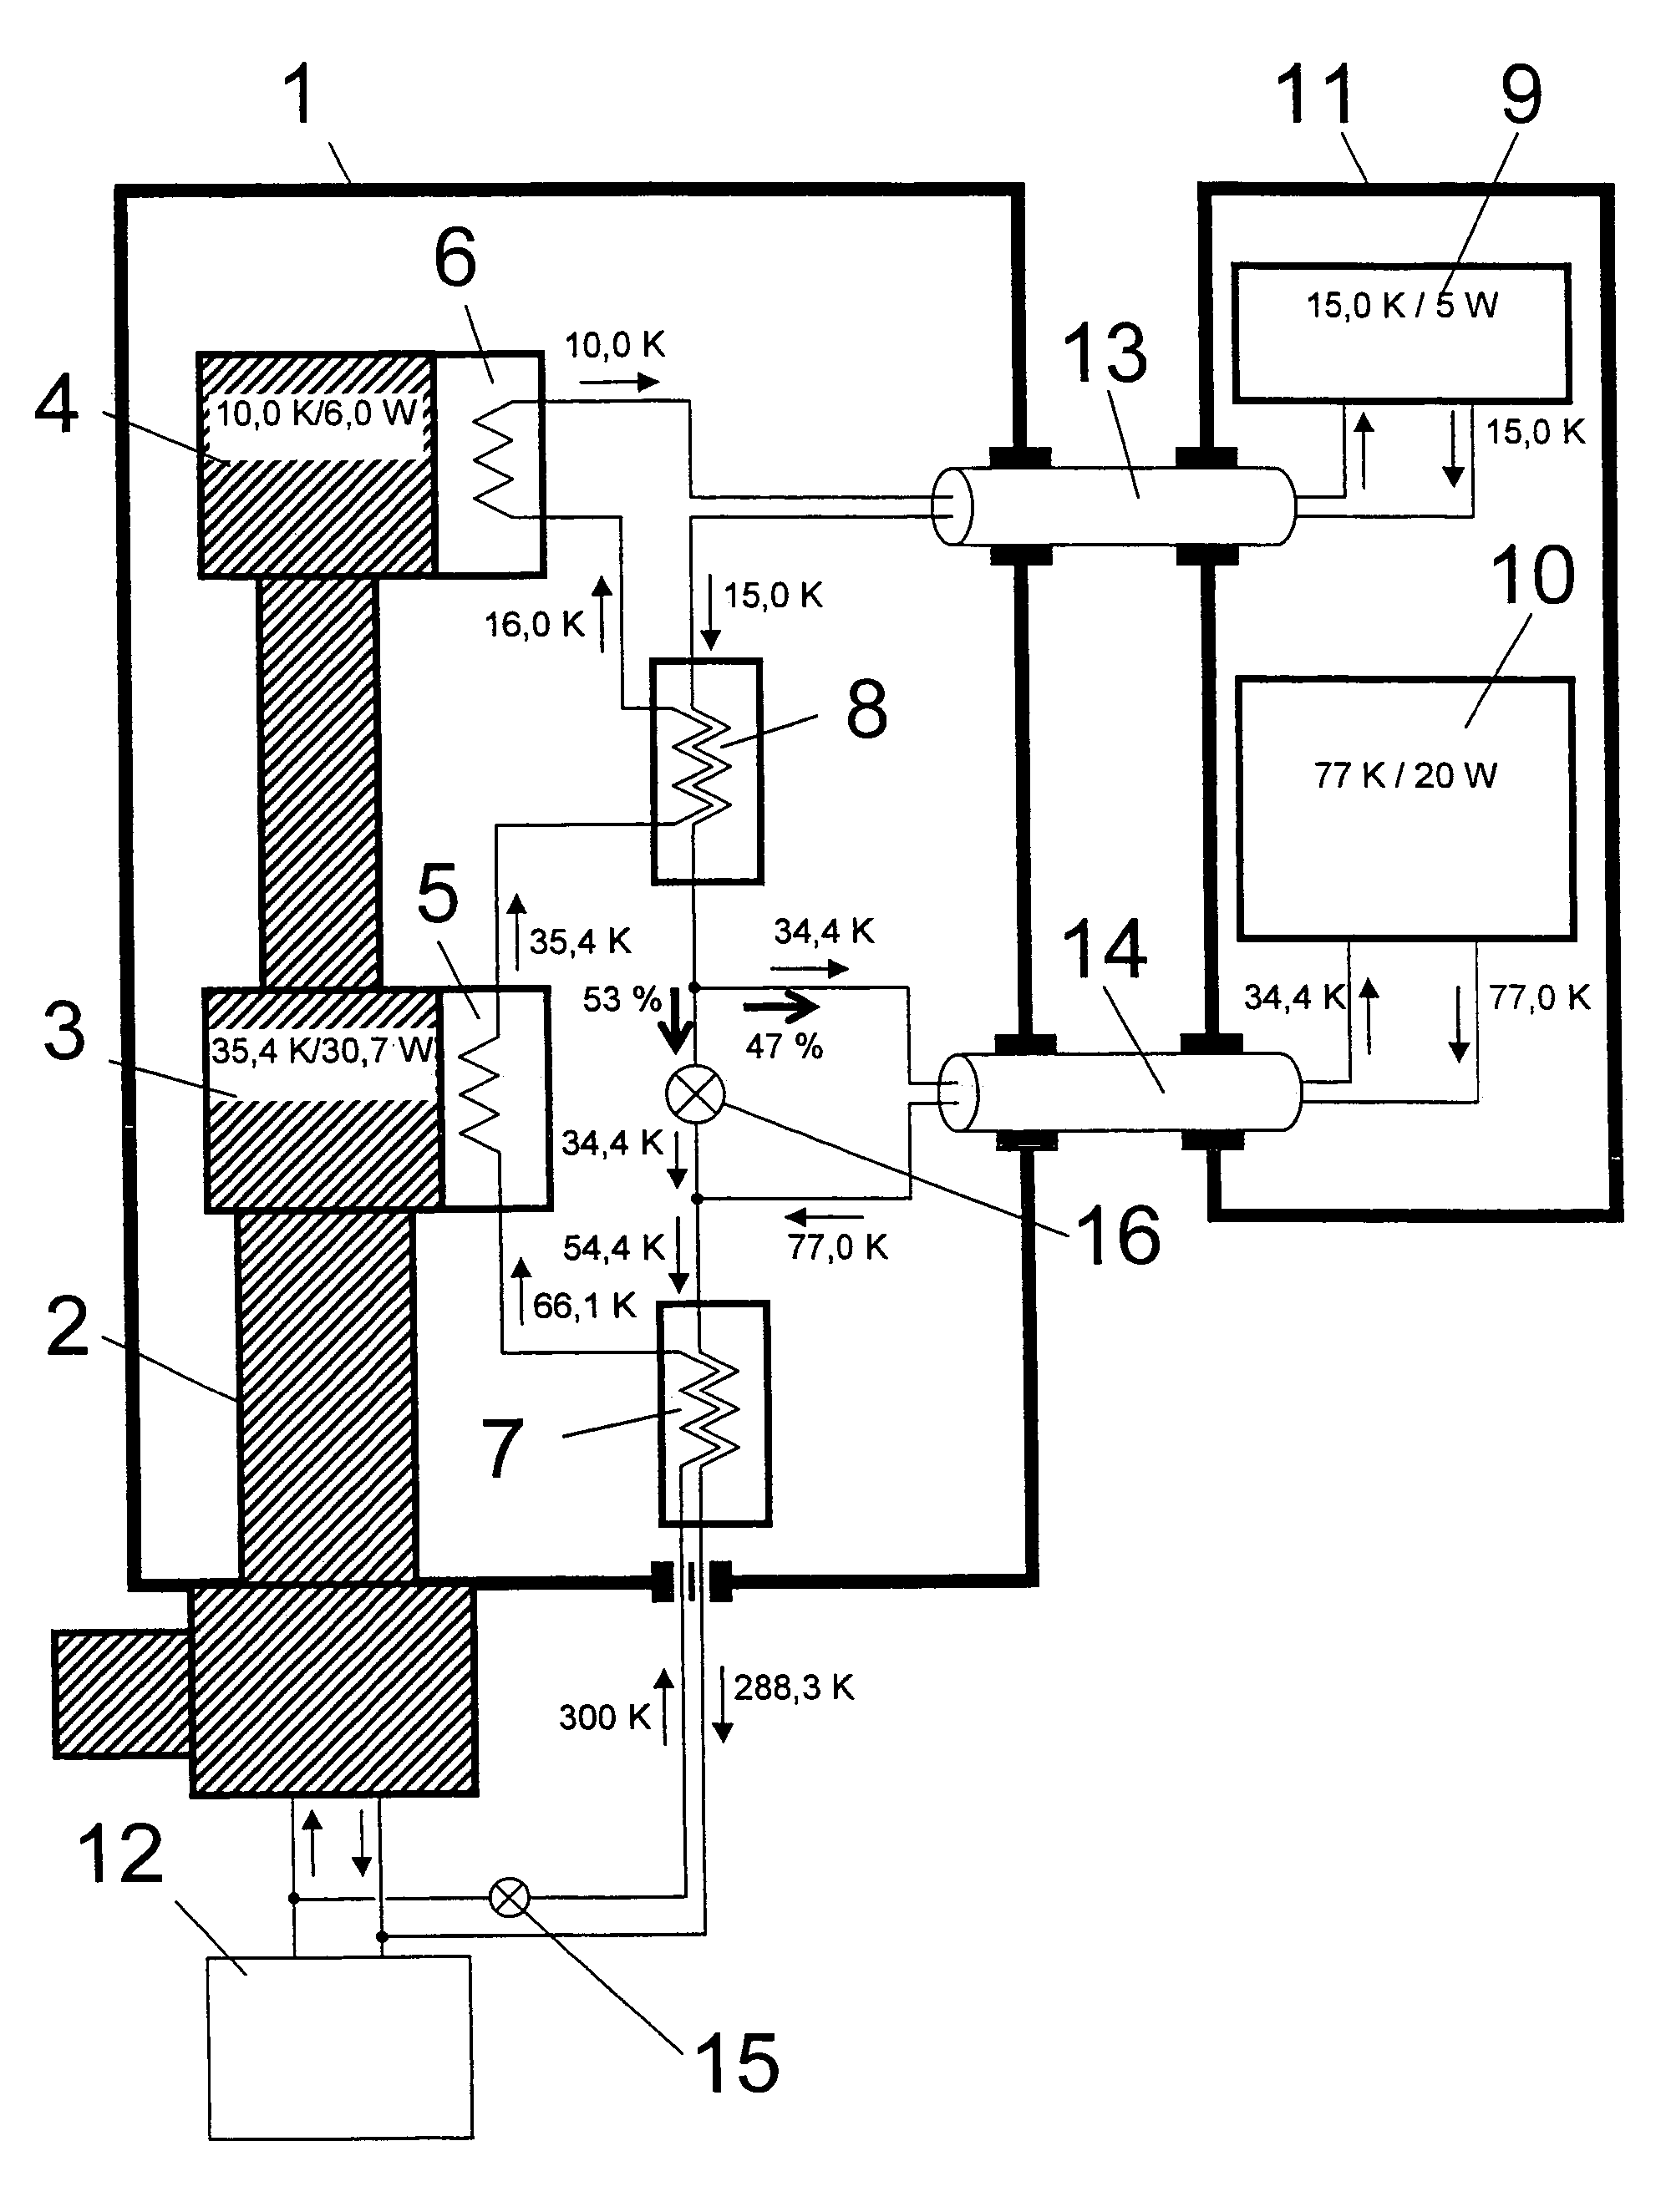 NMR spectrometer with refrigerator cooling